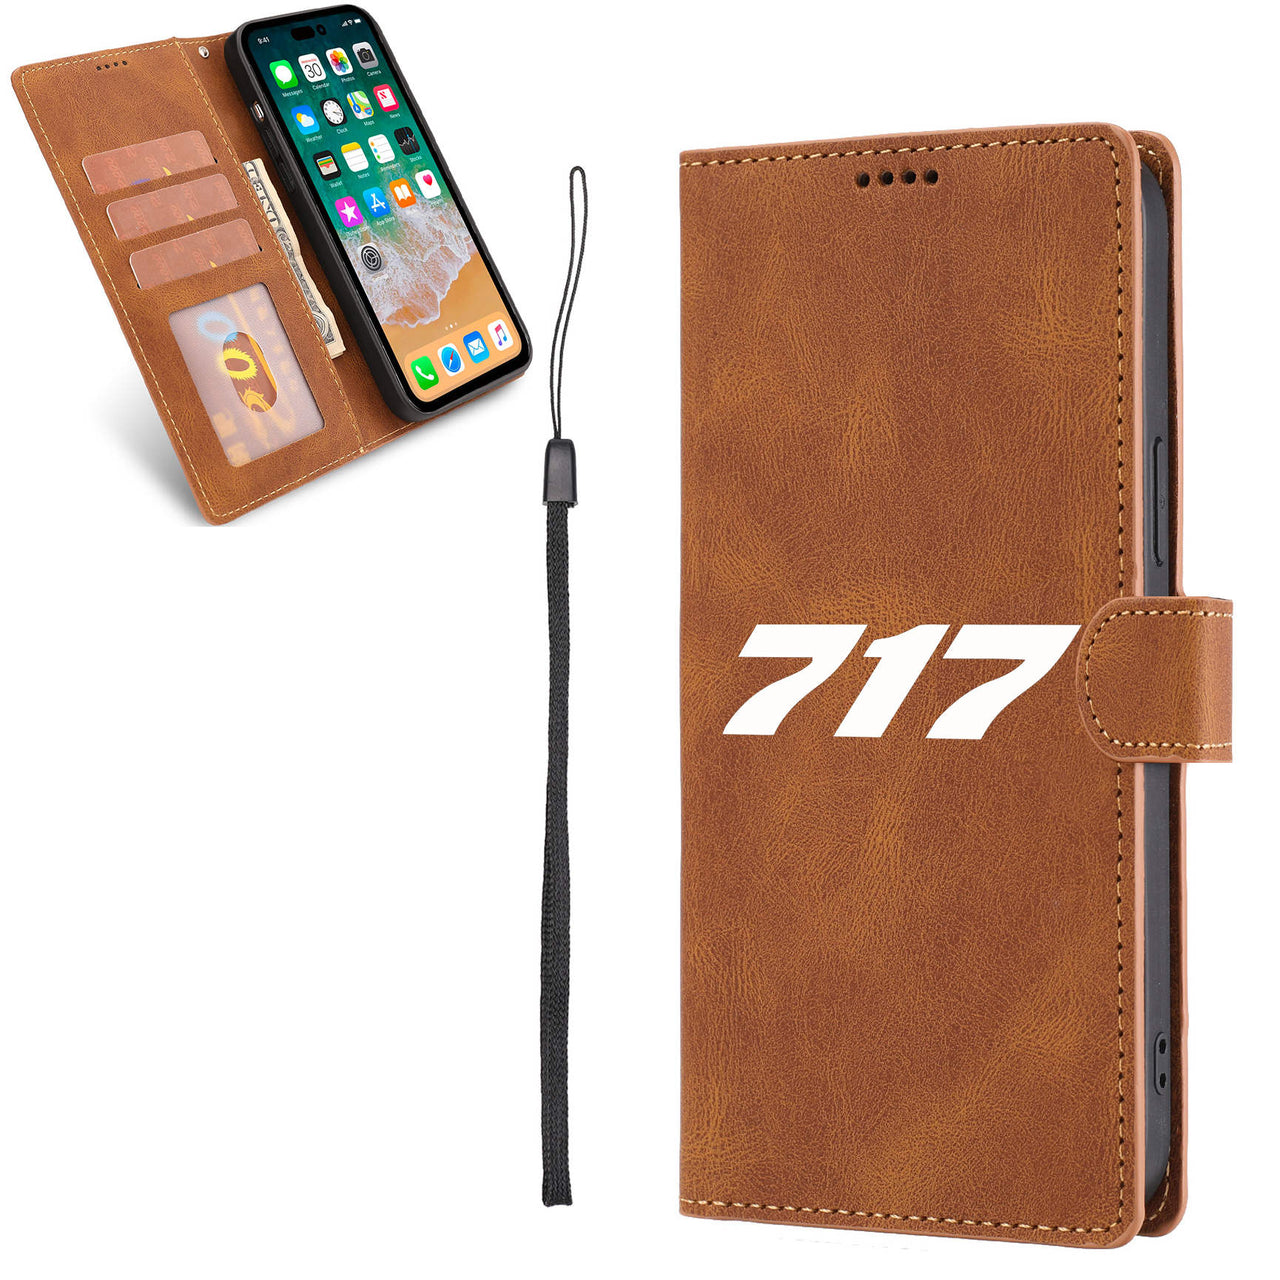 717 Flat Text Designed Leather iPhone Cases